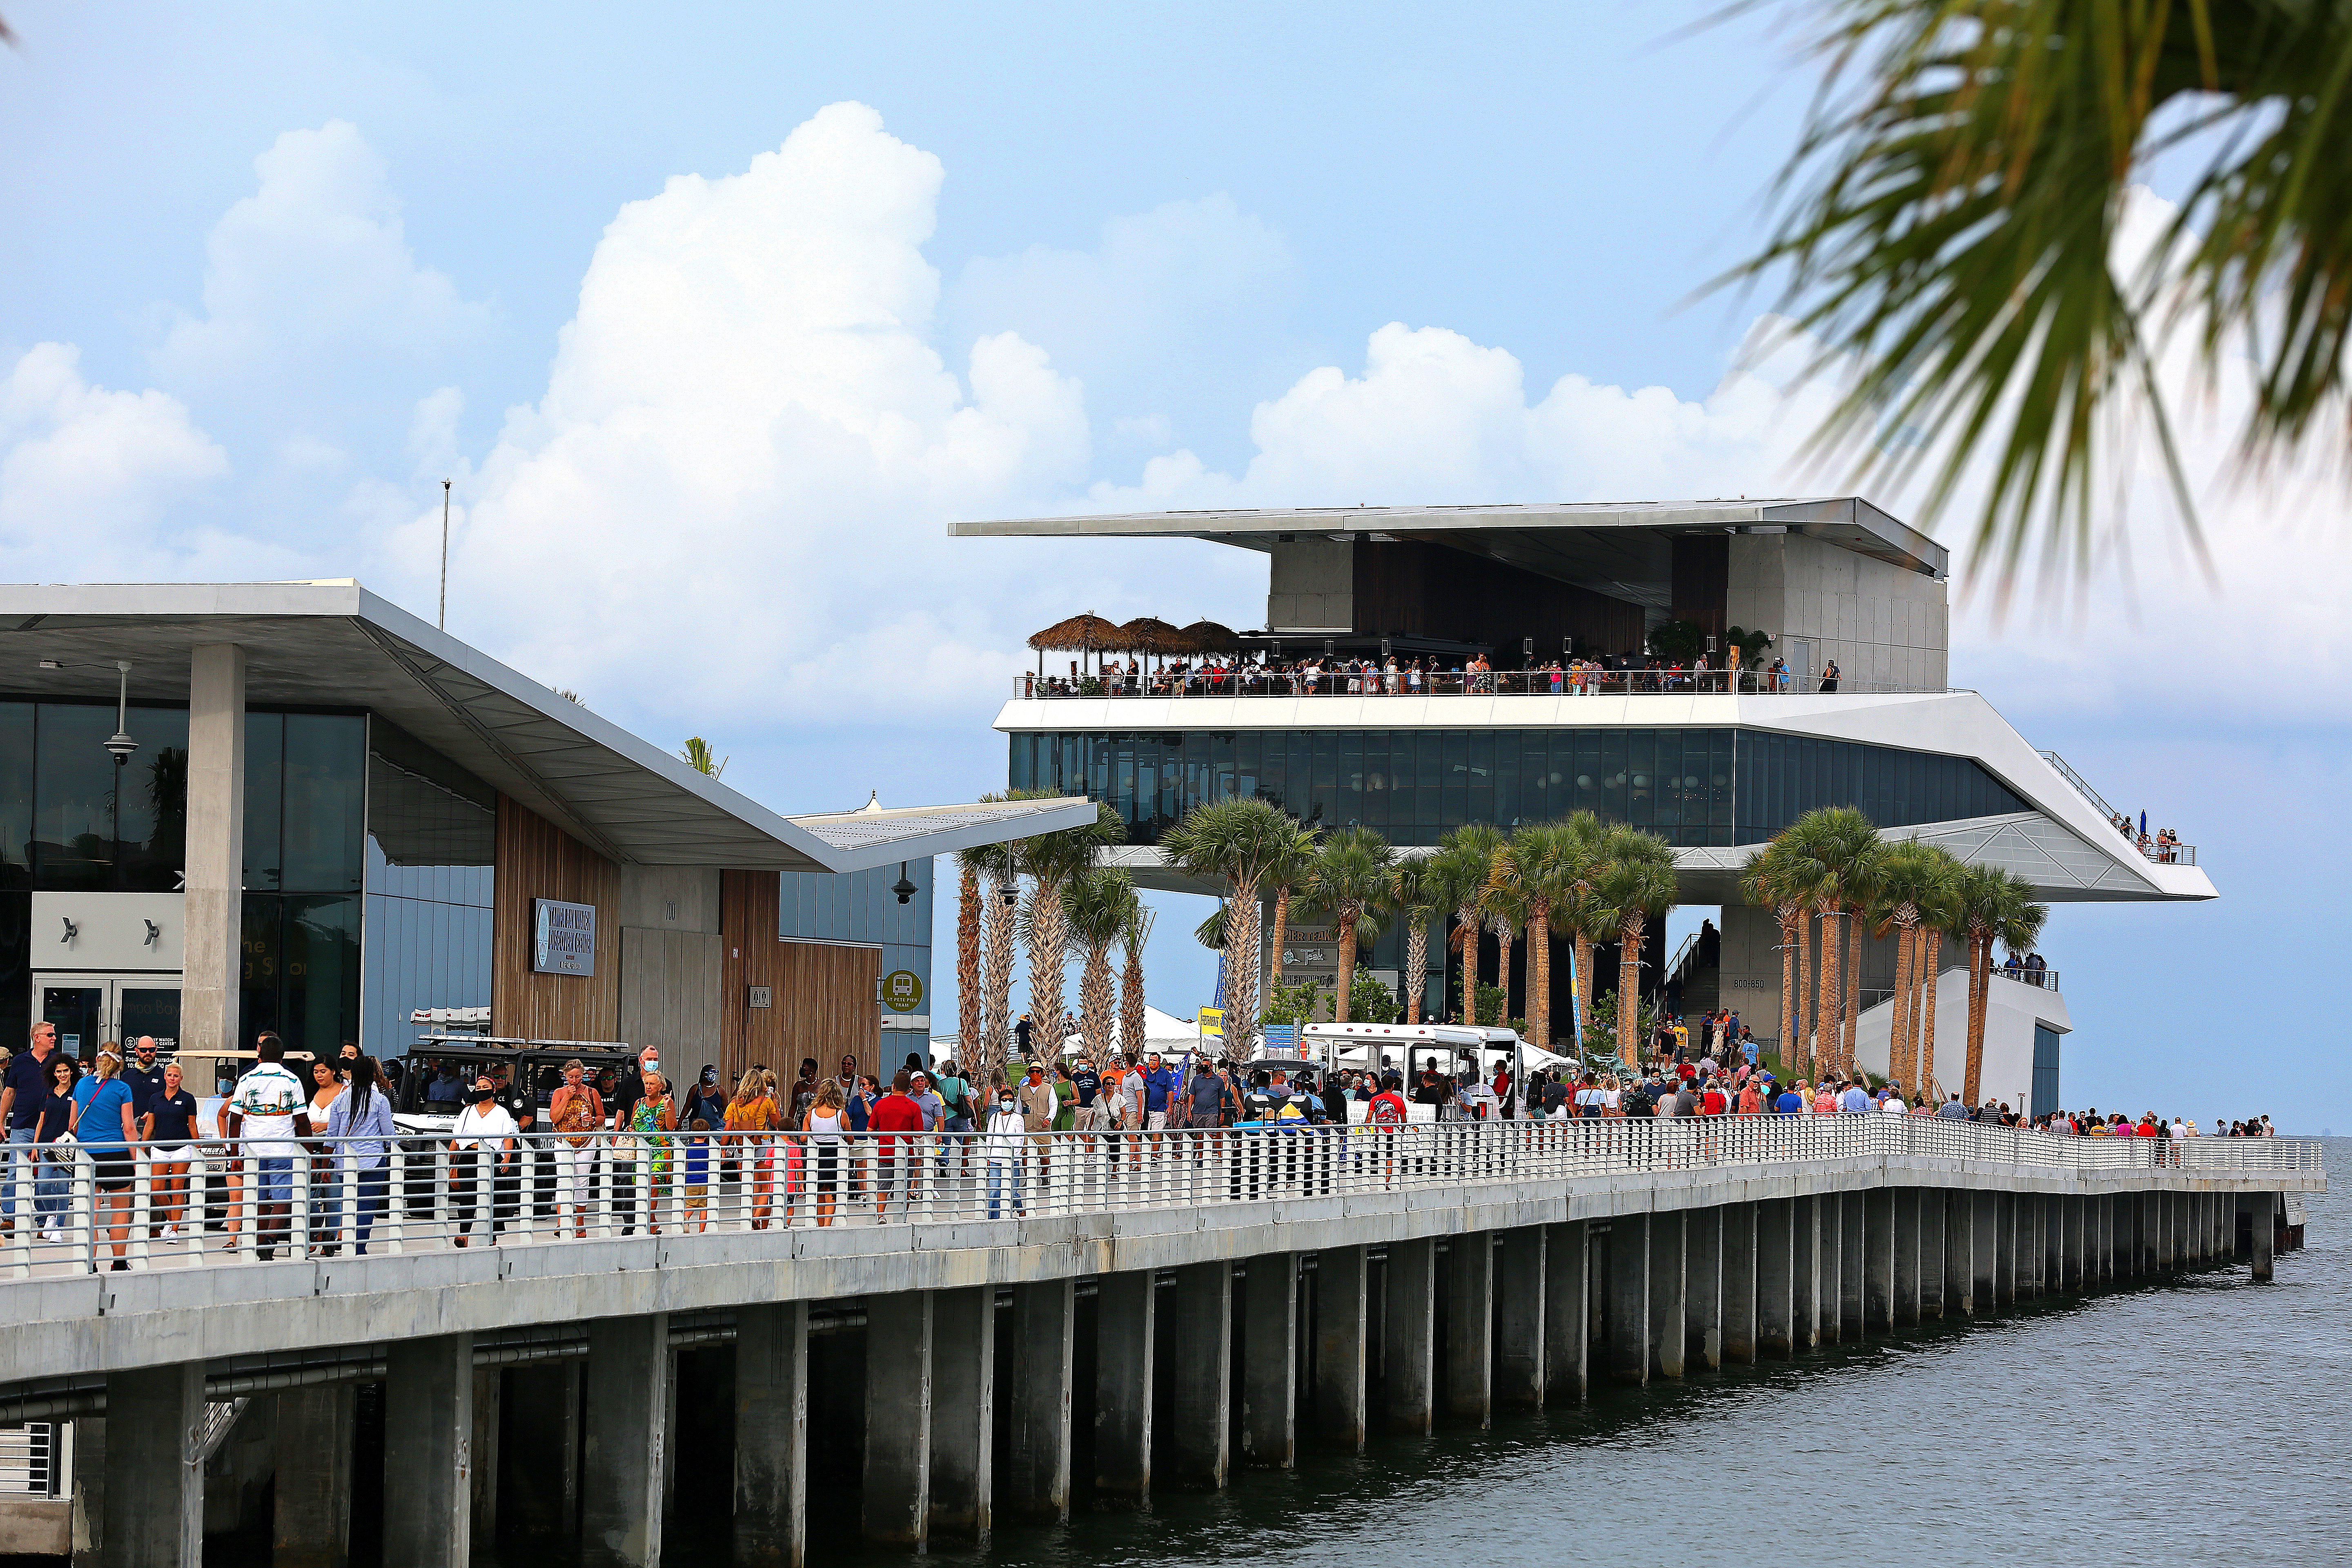 After years, St. Pete Pier opens to a crowd of thousands Monday